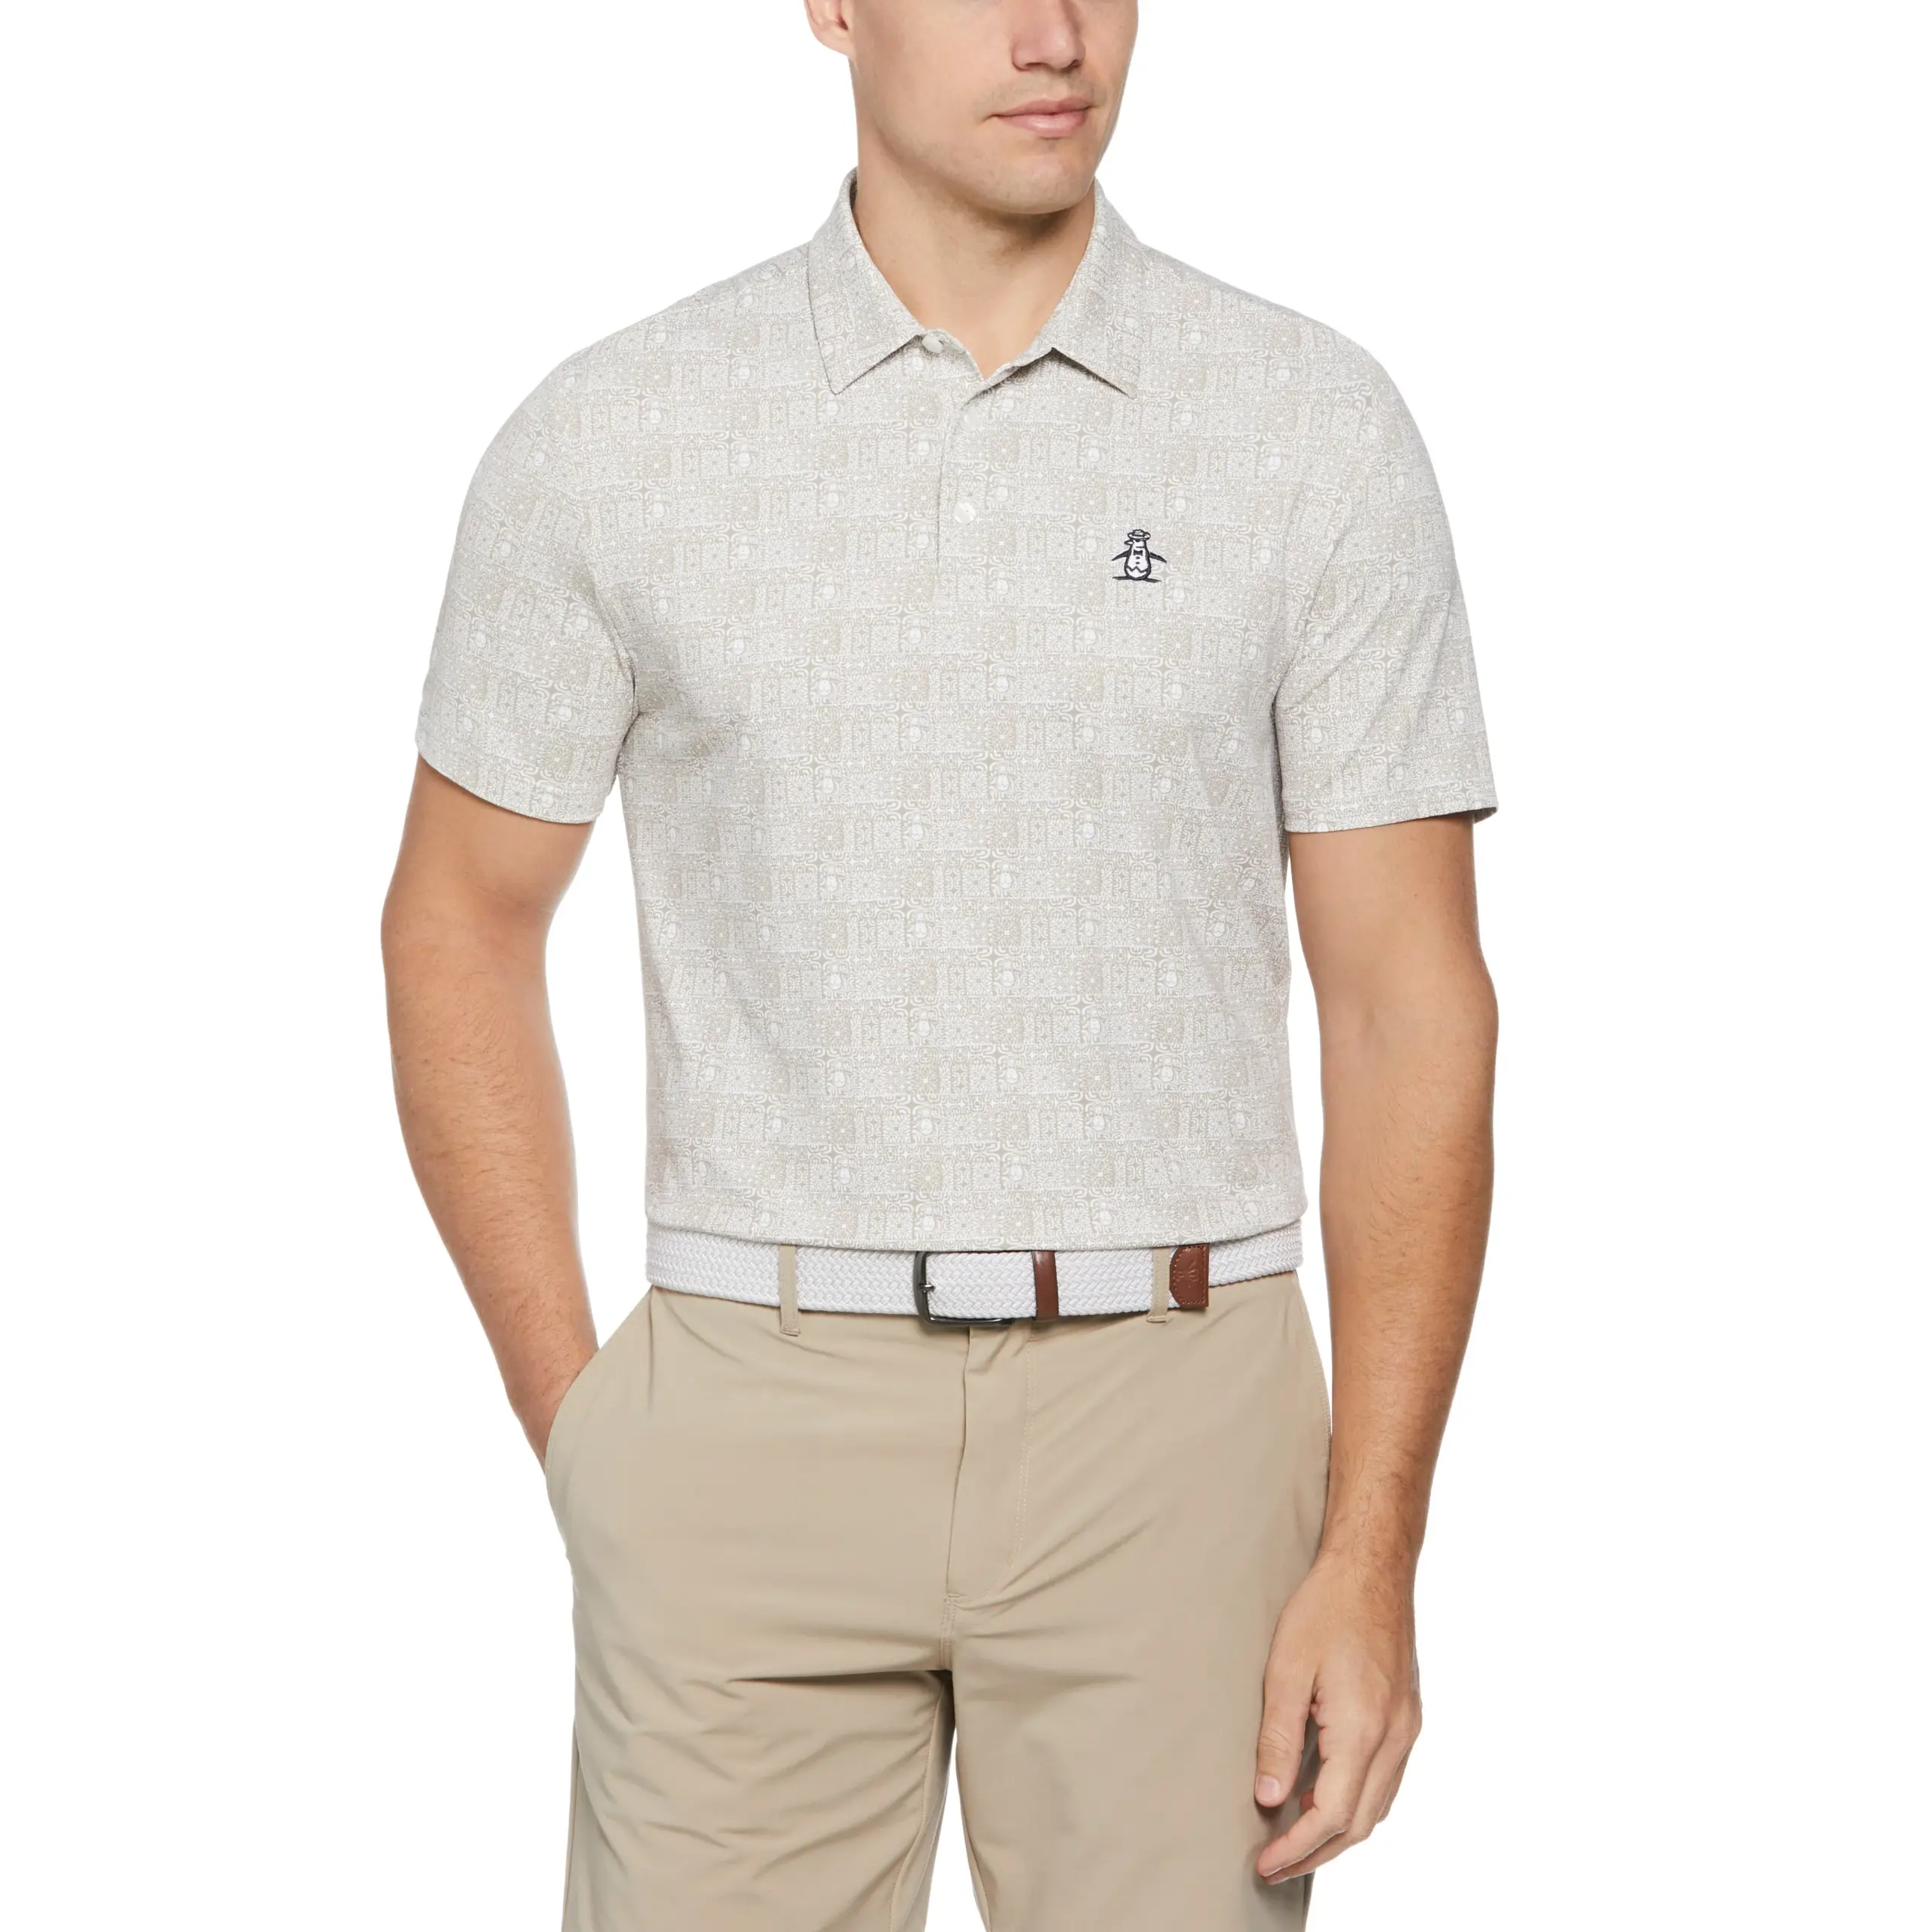 4 golf polos from Chi Chi Rodriguez's Original Penguin collection